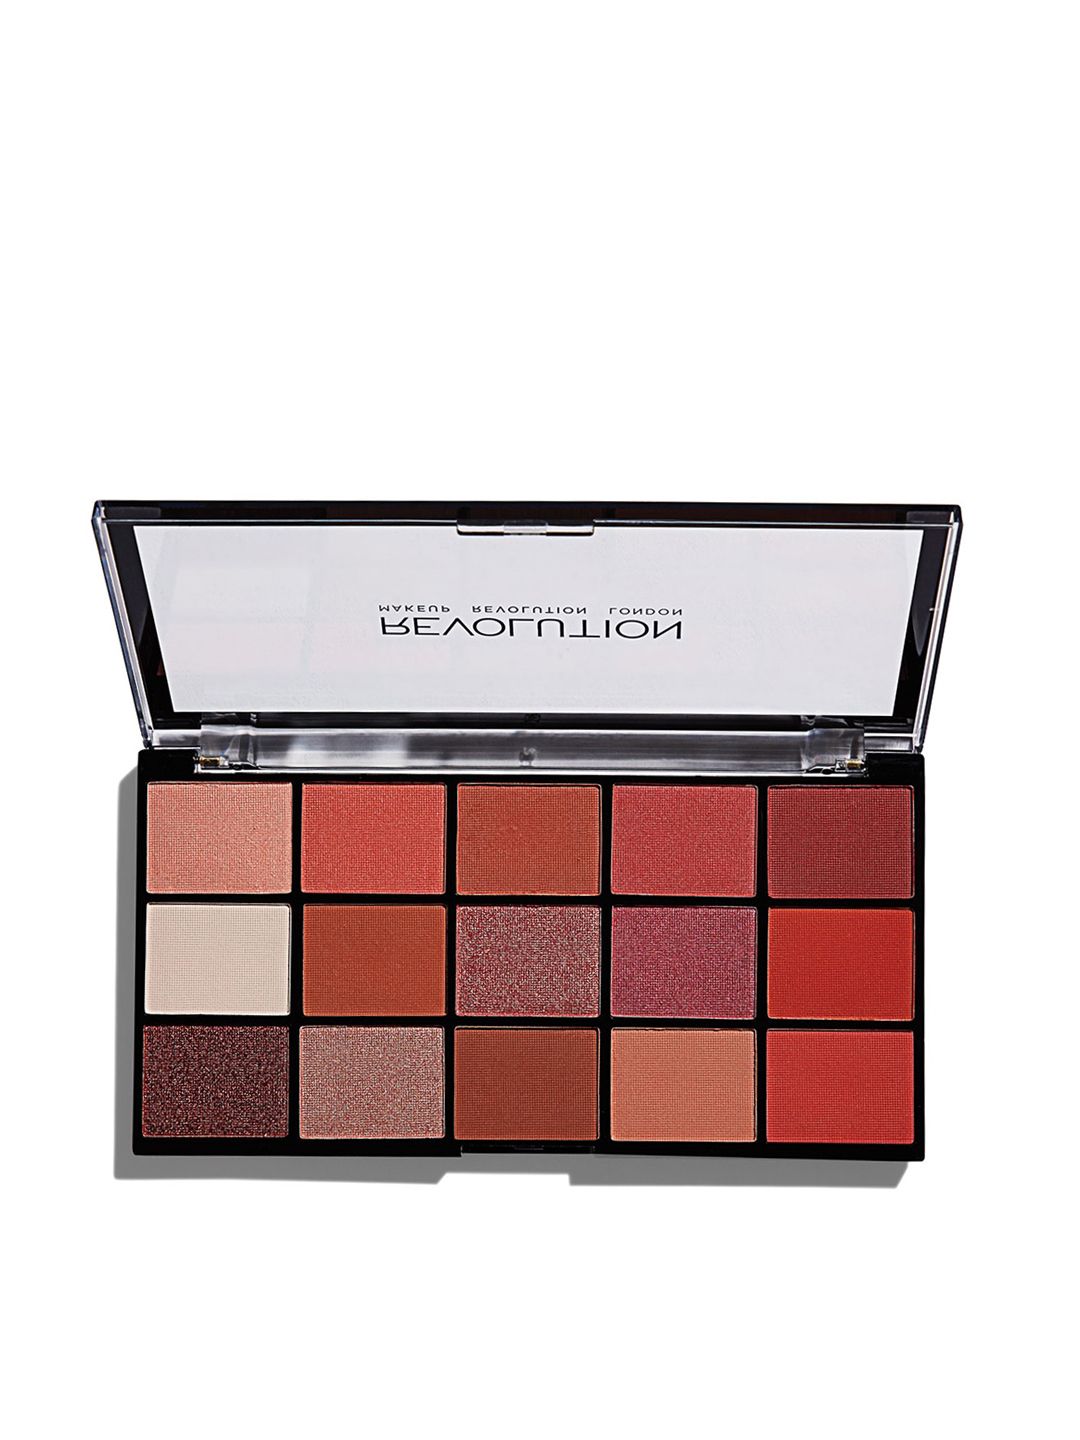 Makeup Revolution London Re-Loaded Eyeshadow Palette - Newtrals 2 16.5 g Price in India